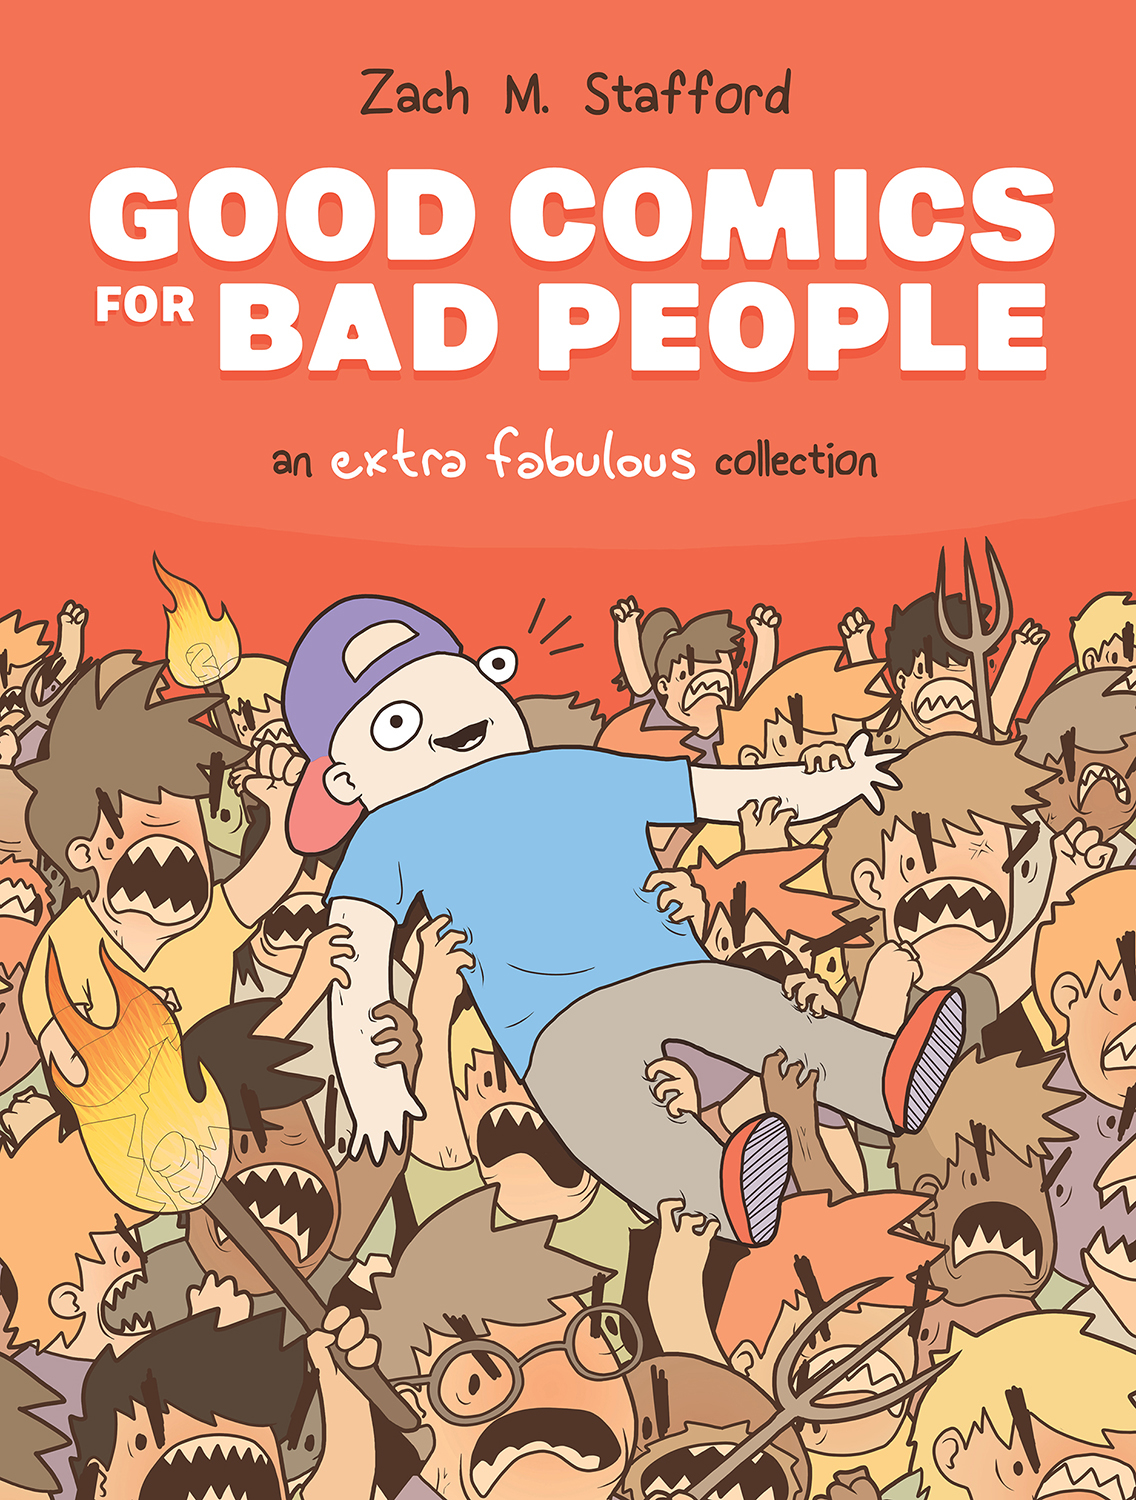 Good Comics for Bad People An Extra Fabulous Collected Hardcover (Mature)